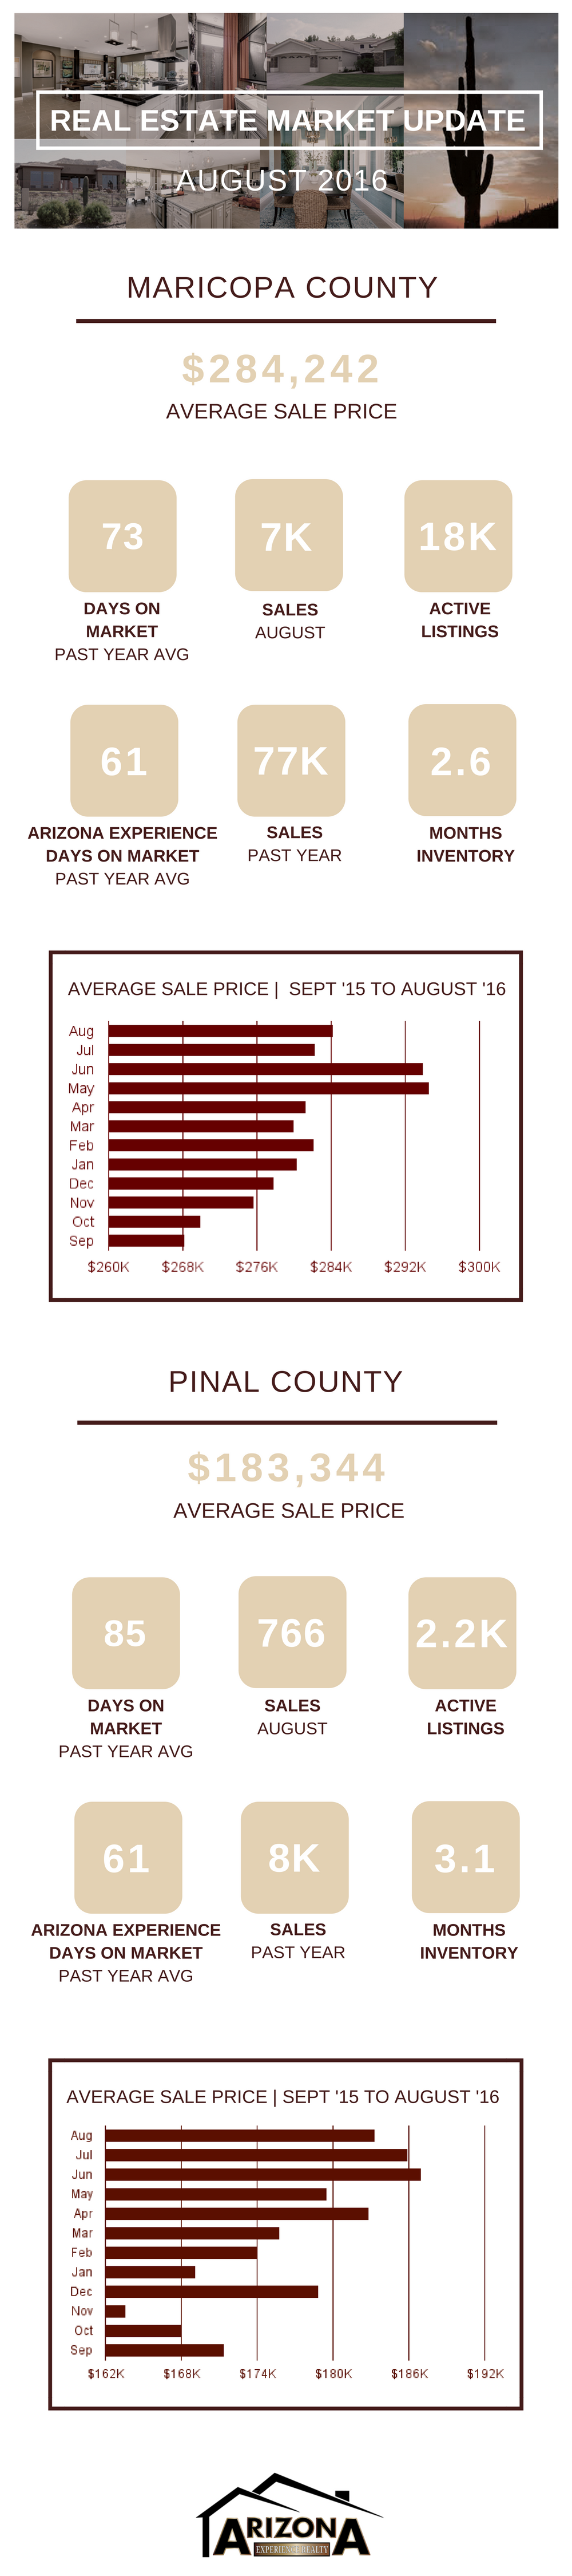 market-update-maricopa-pinal-counties-august-2016